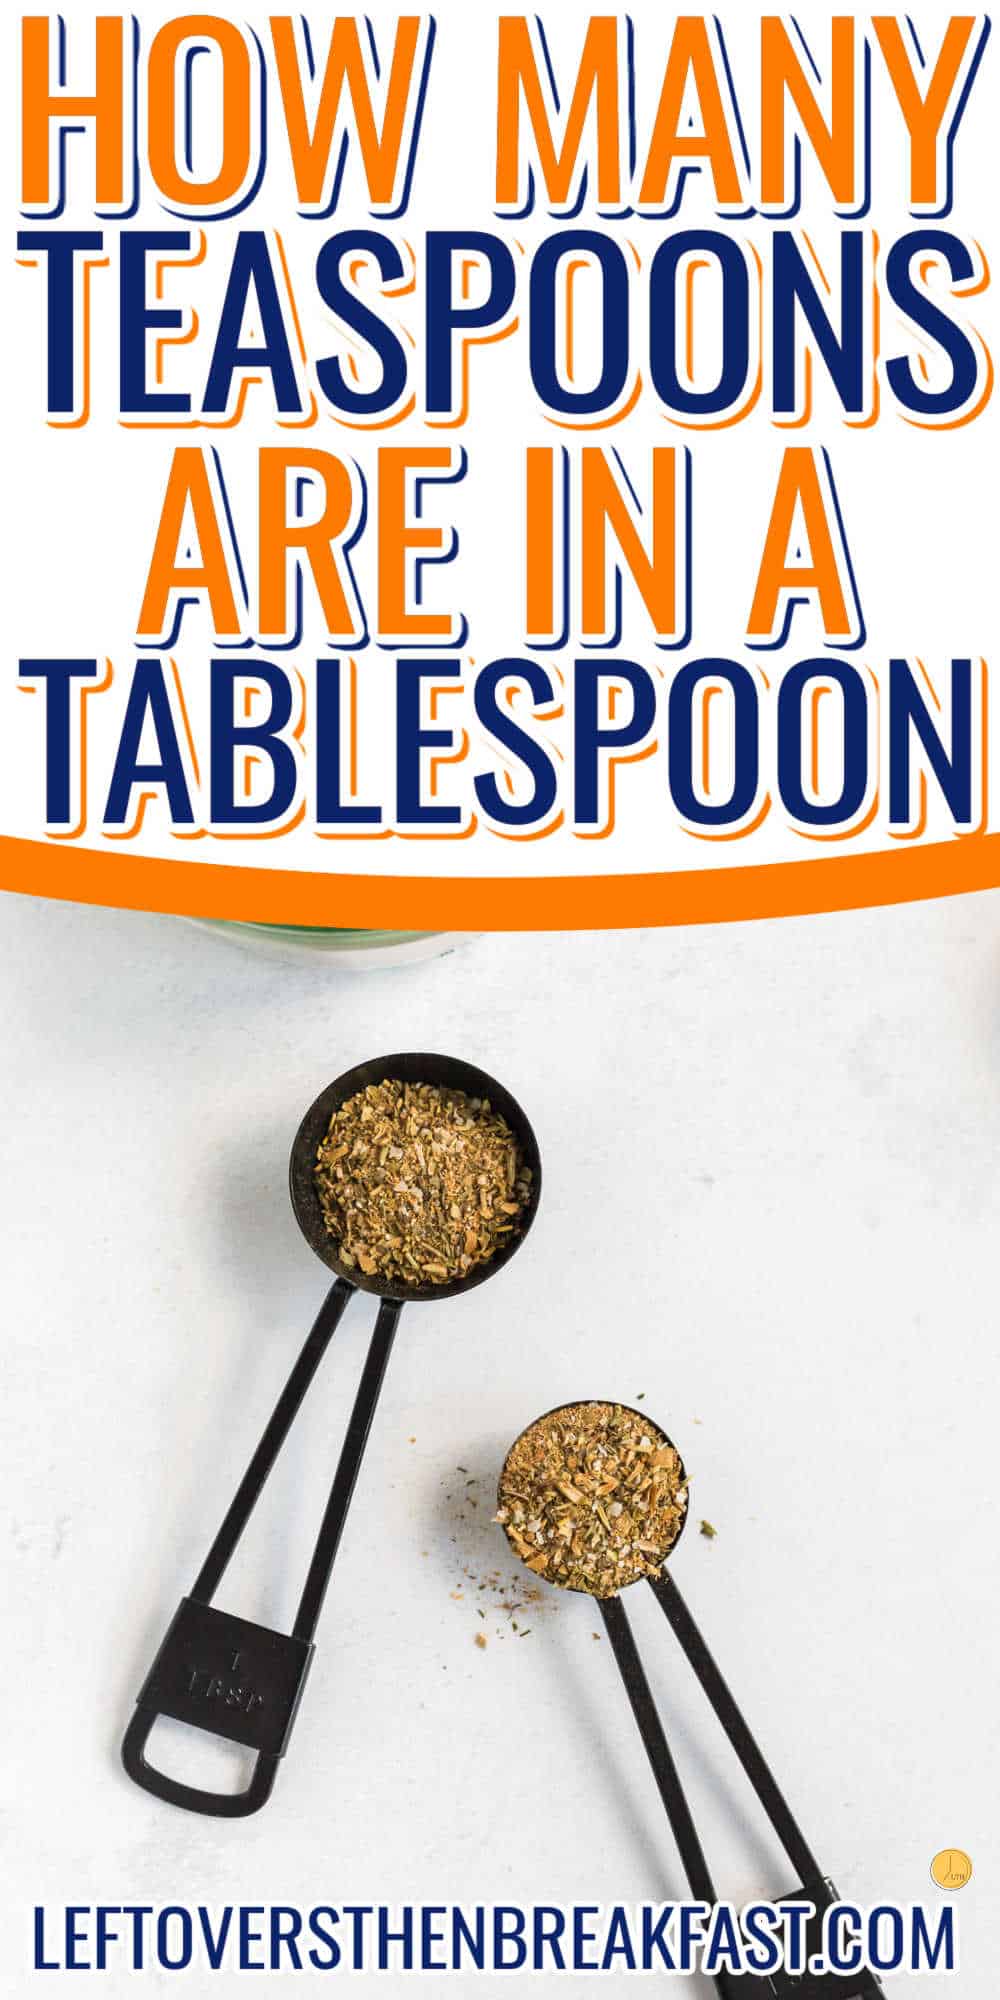 Hero image for how many teaspoons are in a tablespoon